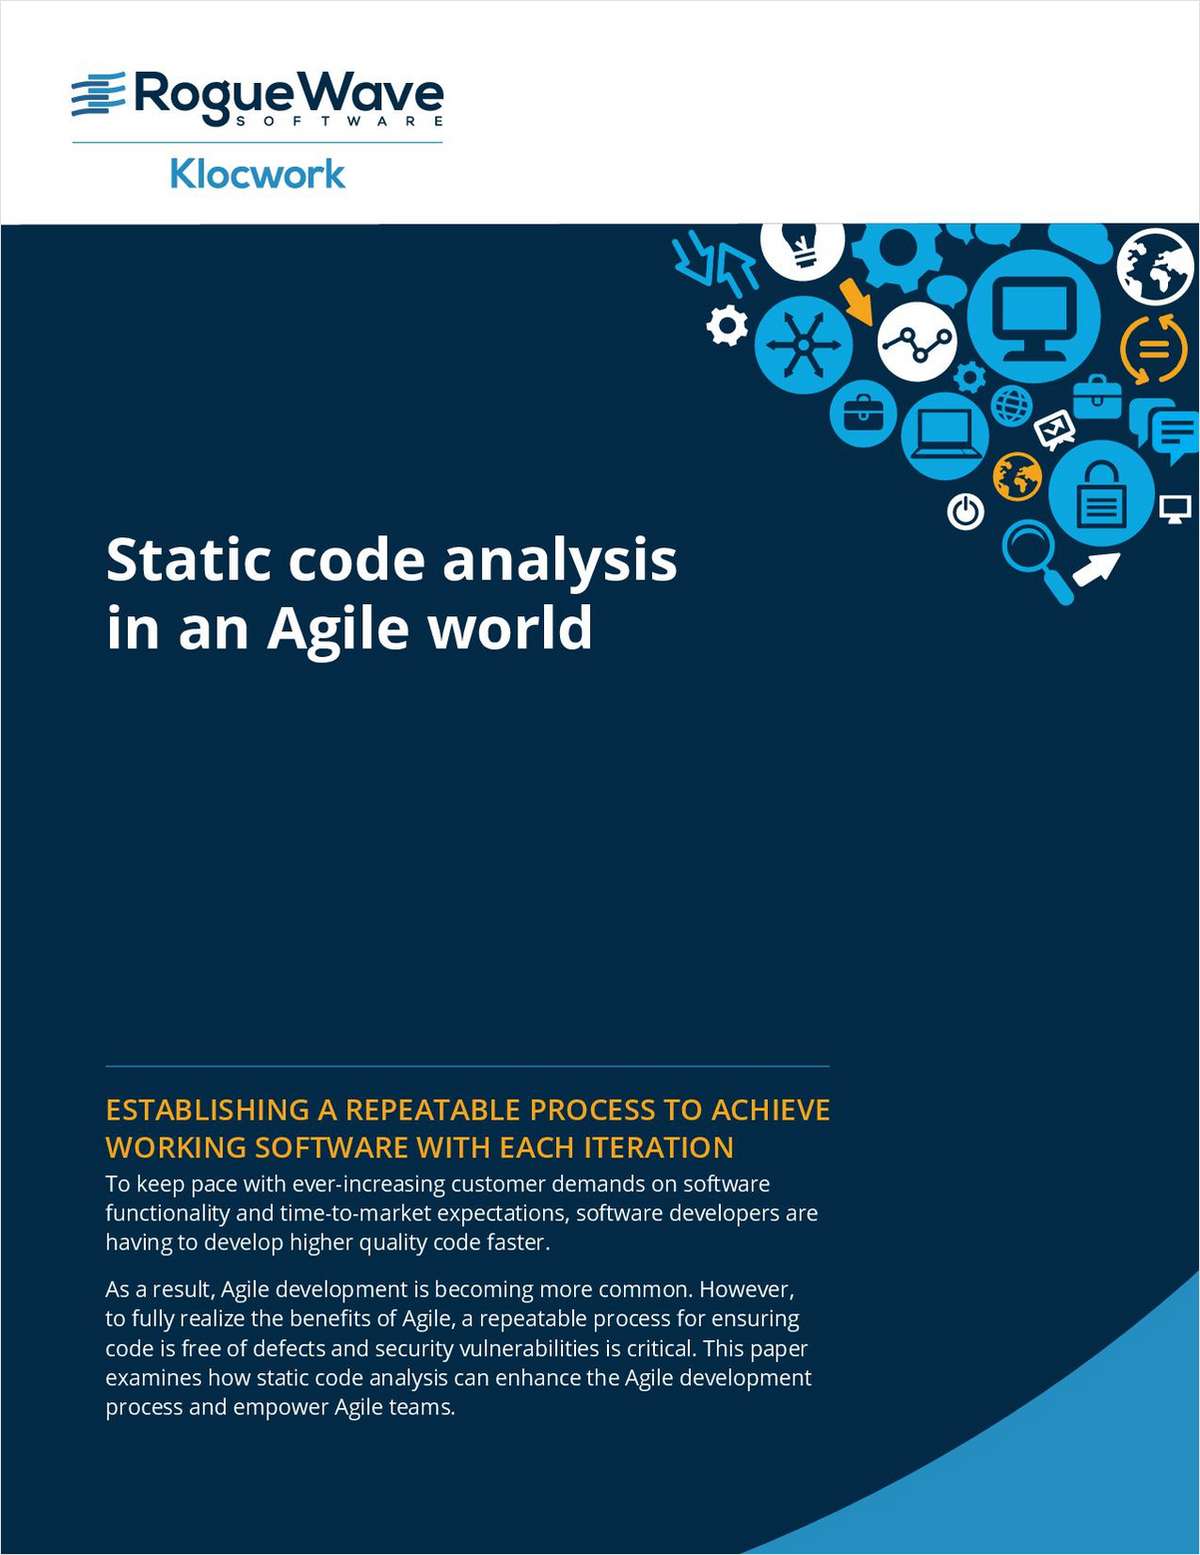 Static Code Analysis in an Agile World